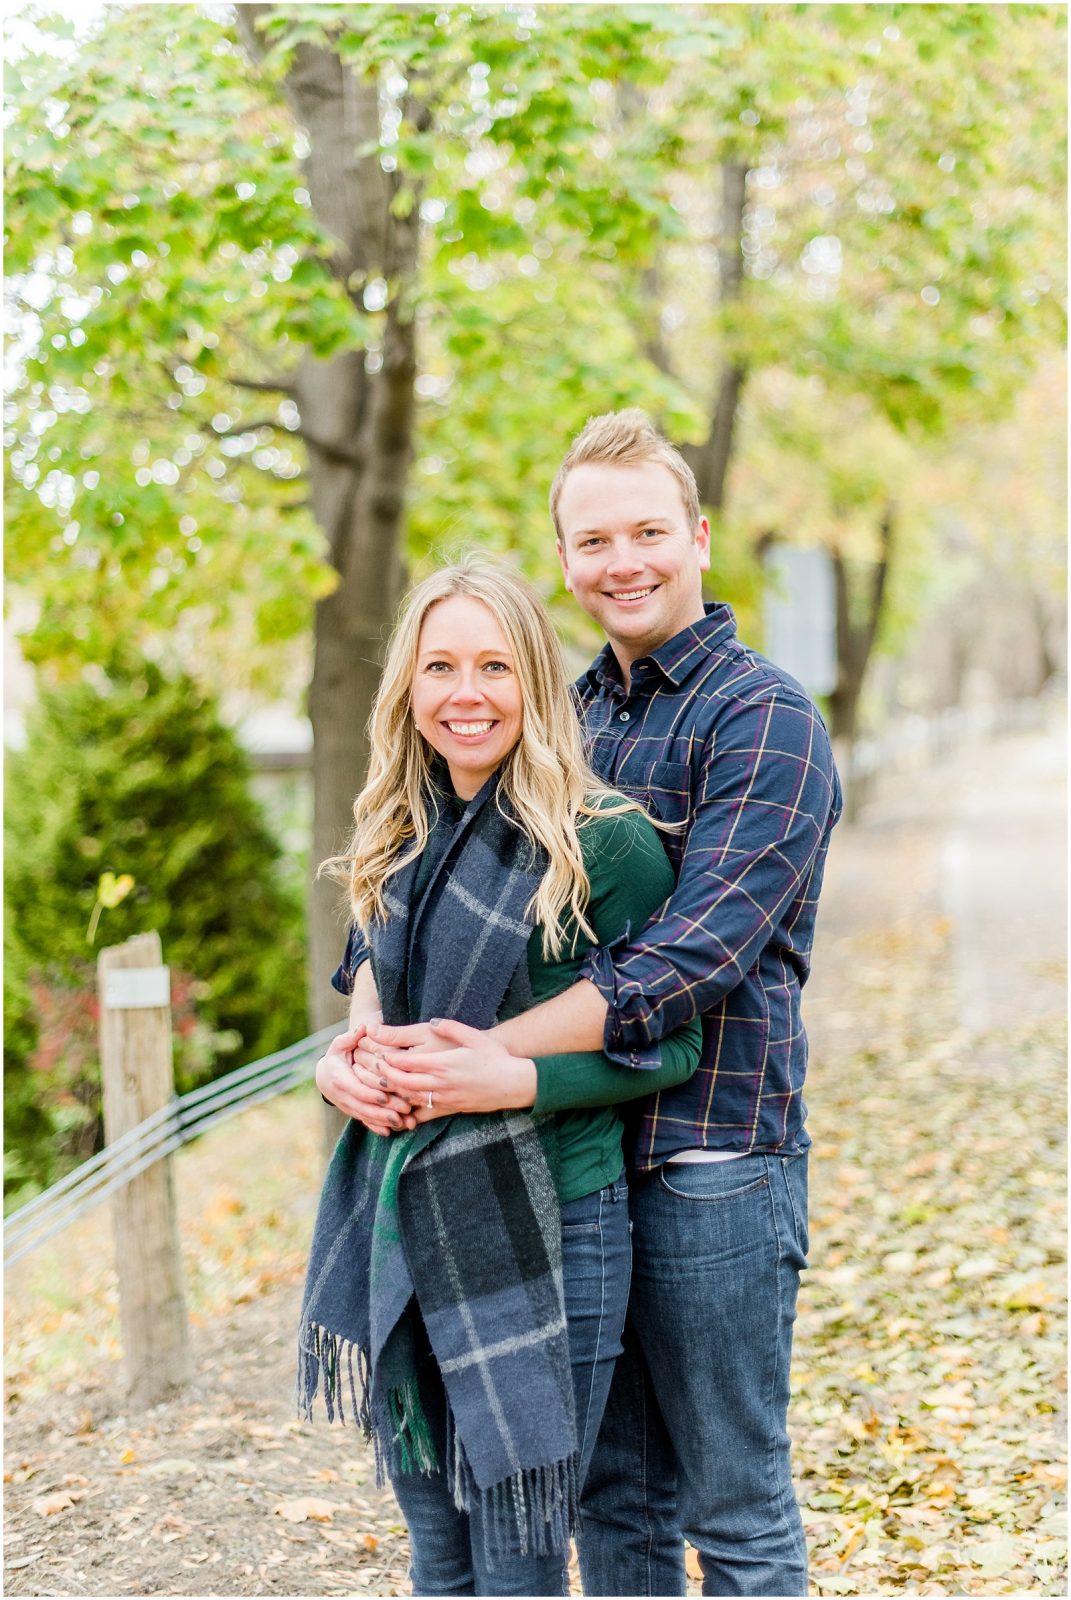 Lorne Park Brantford Engagement Session couple smiling in the fall leaves